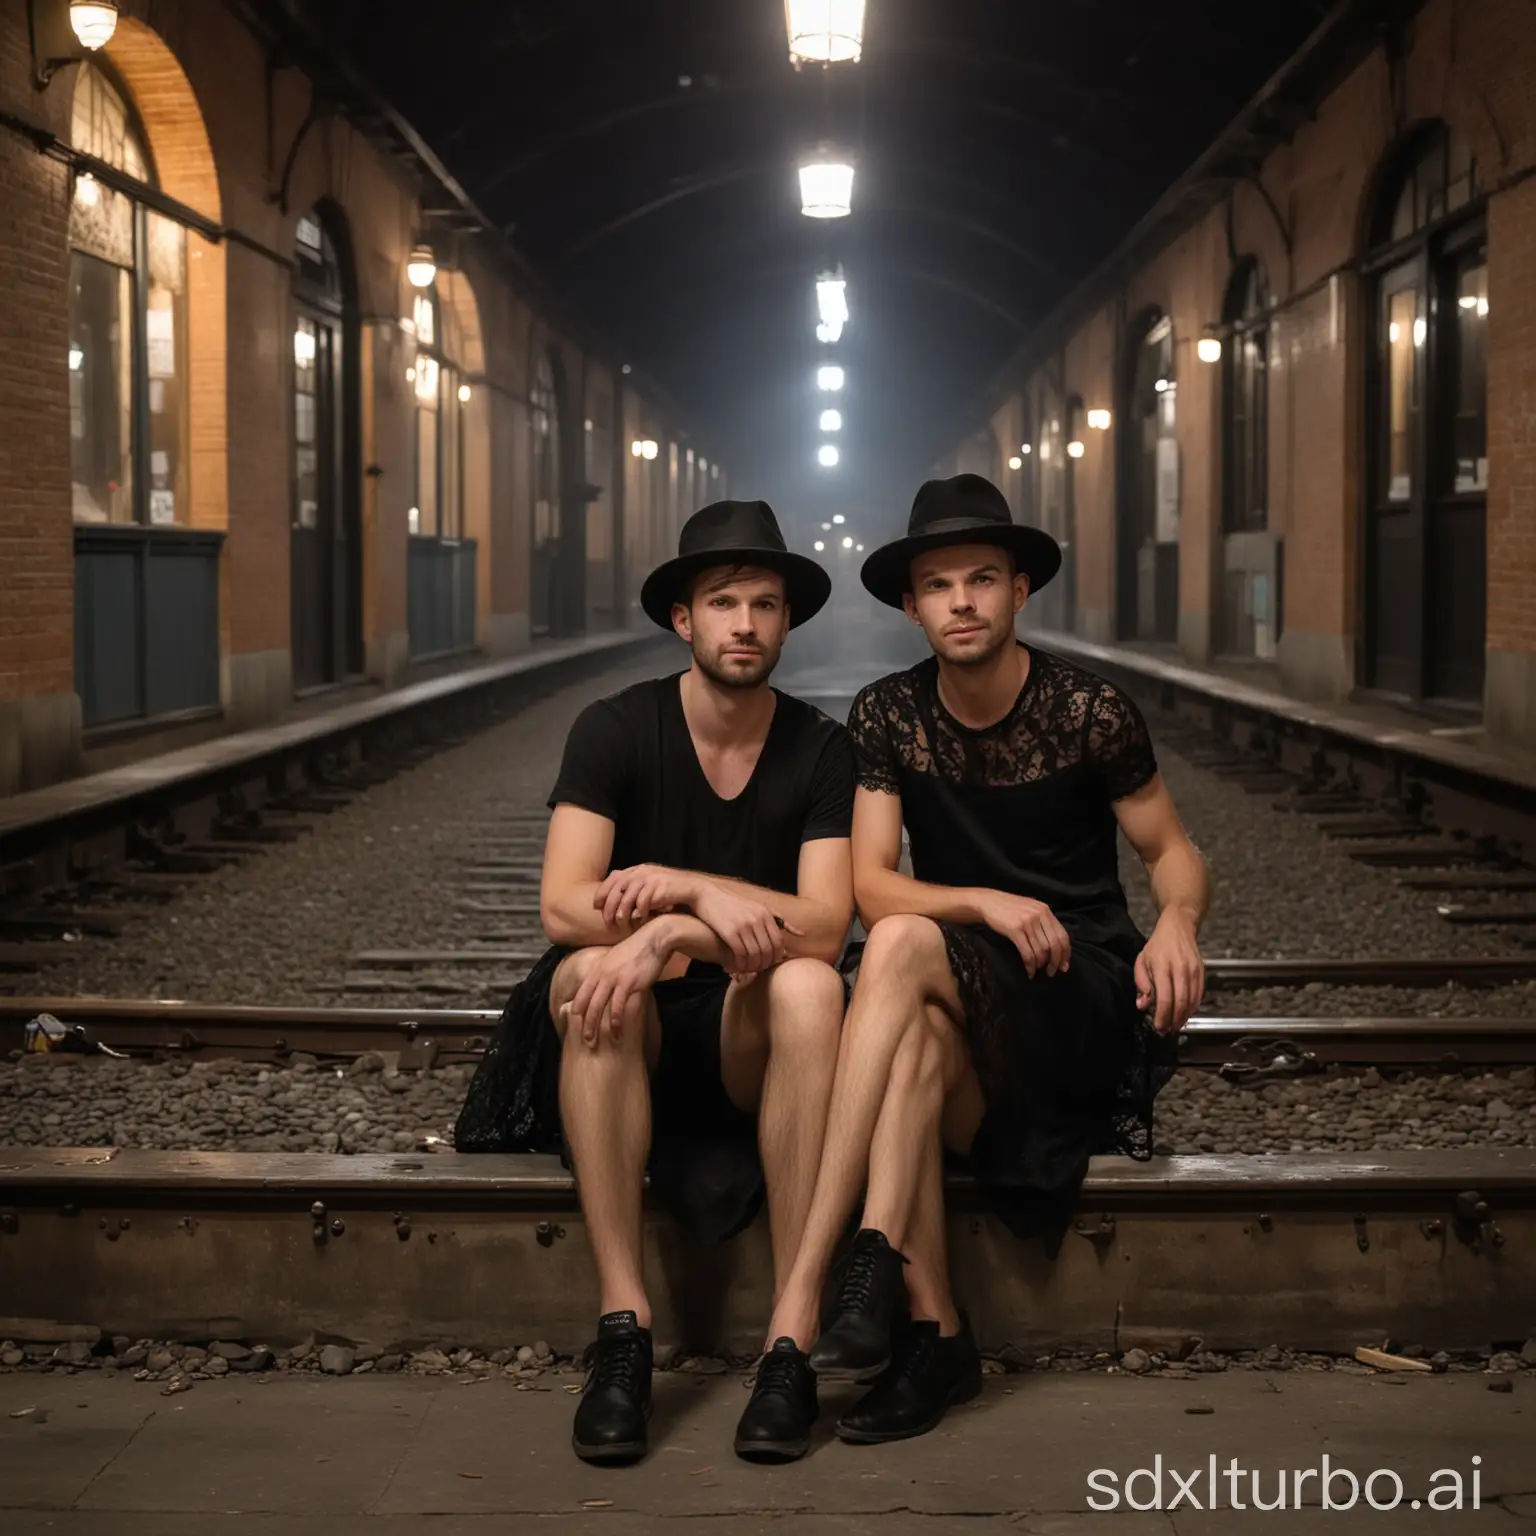 30 year old guys with a short black dress, lace and big black hat sitting at night in an old train station without lights.